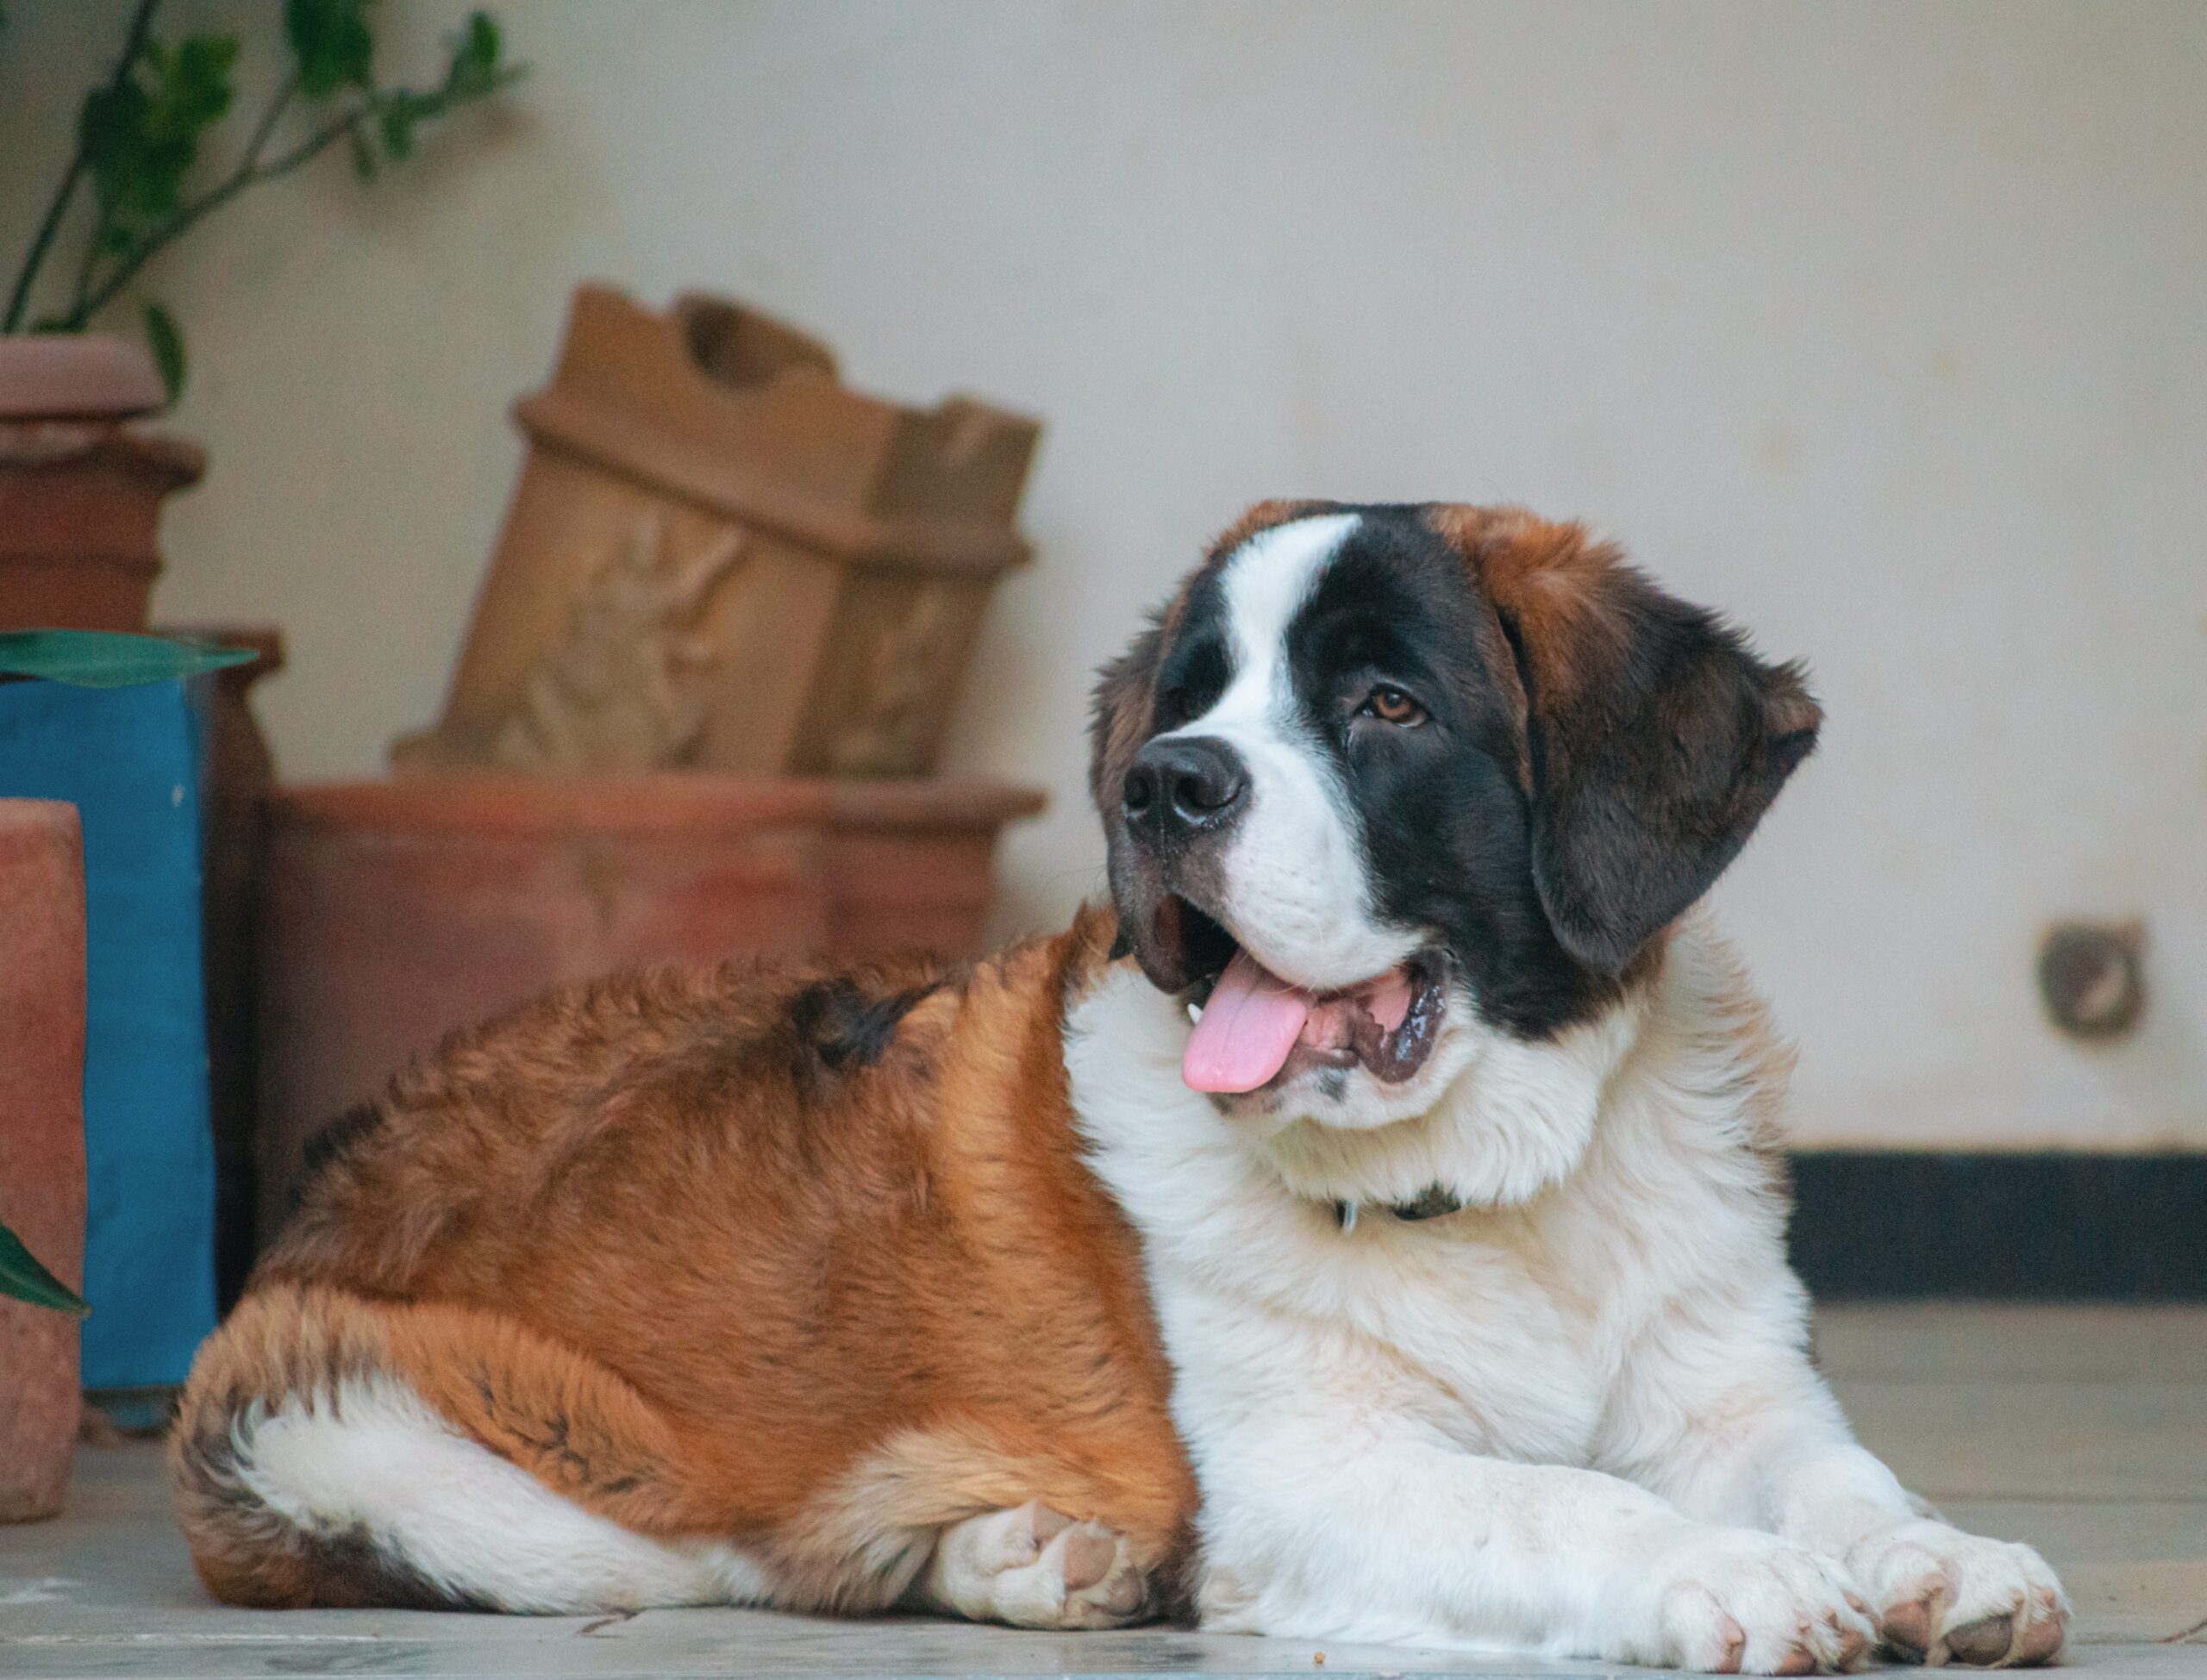 5 Tips for Grooming and Care For a Saint Bernard